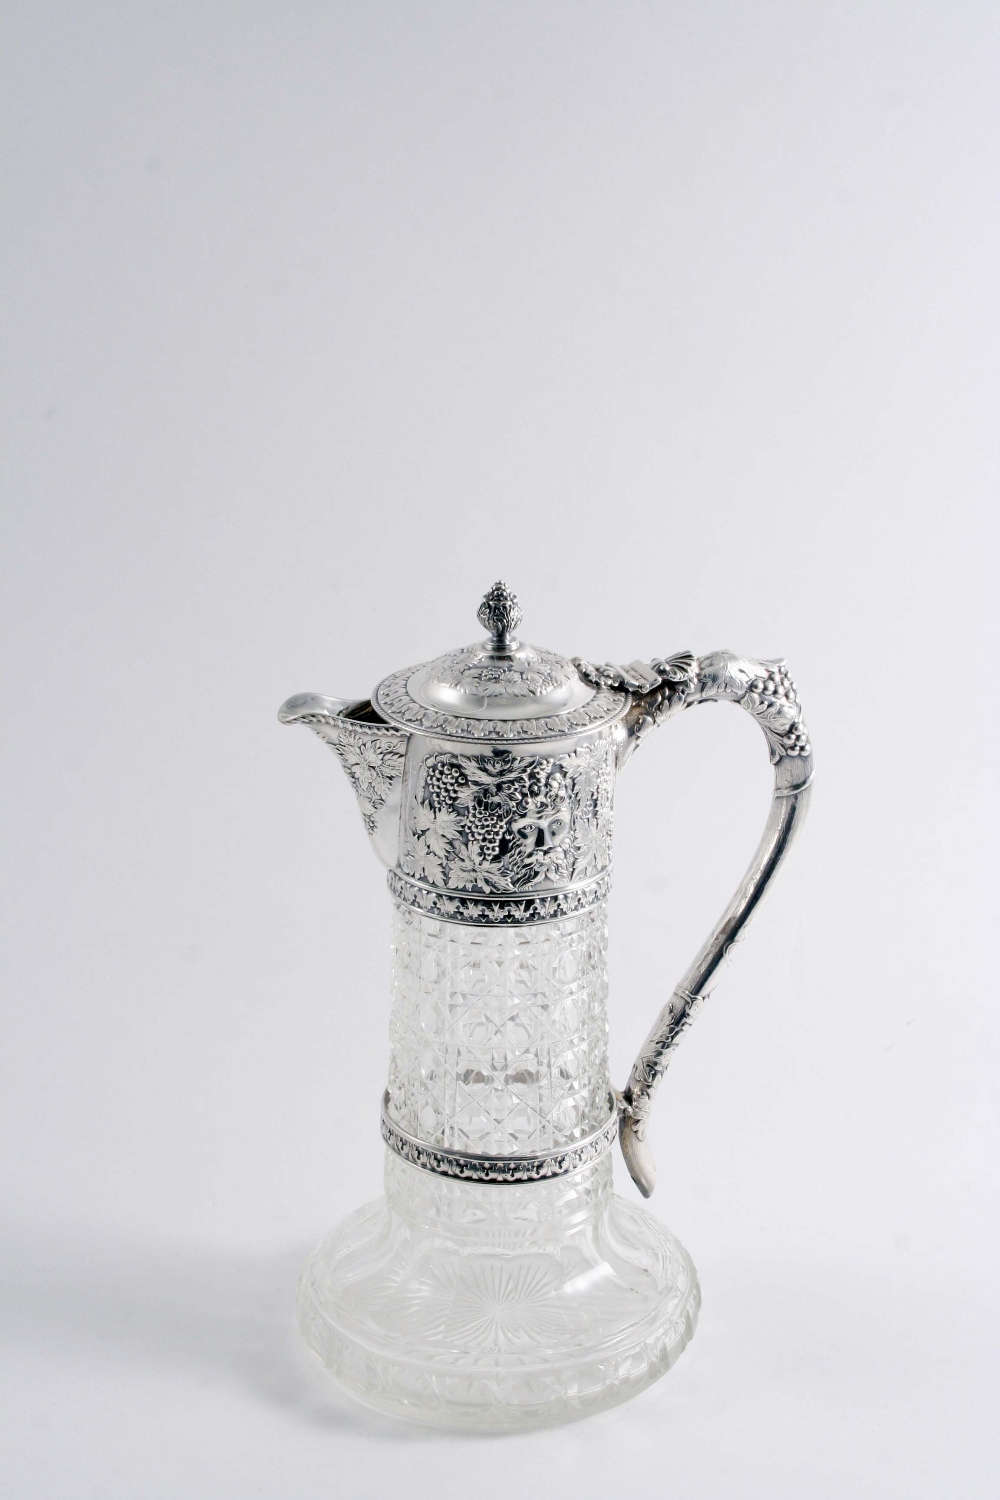 AN EDWARDIAN MOUNTED CUT-GLASS CLARET JUG decorated in low relief around the mount with fruiting